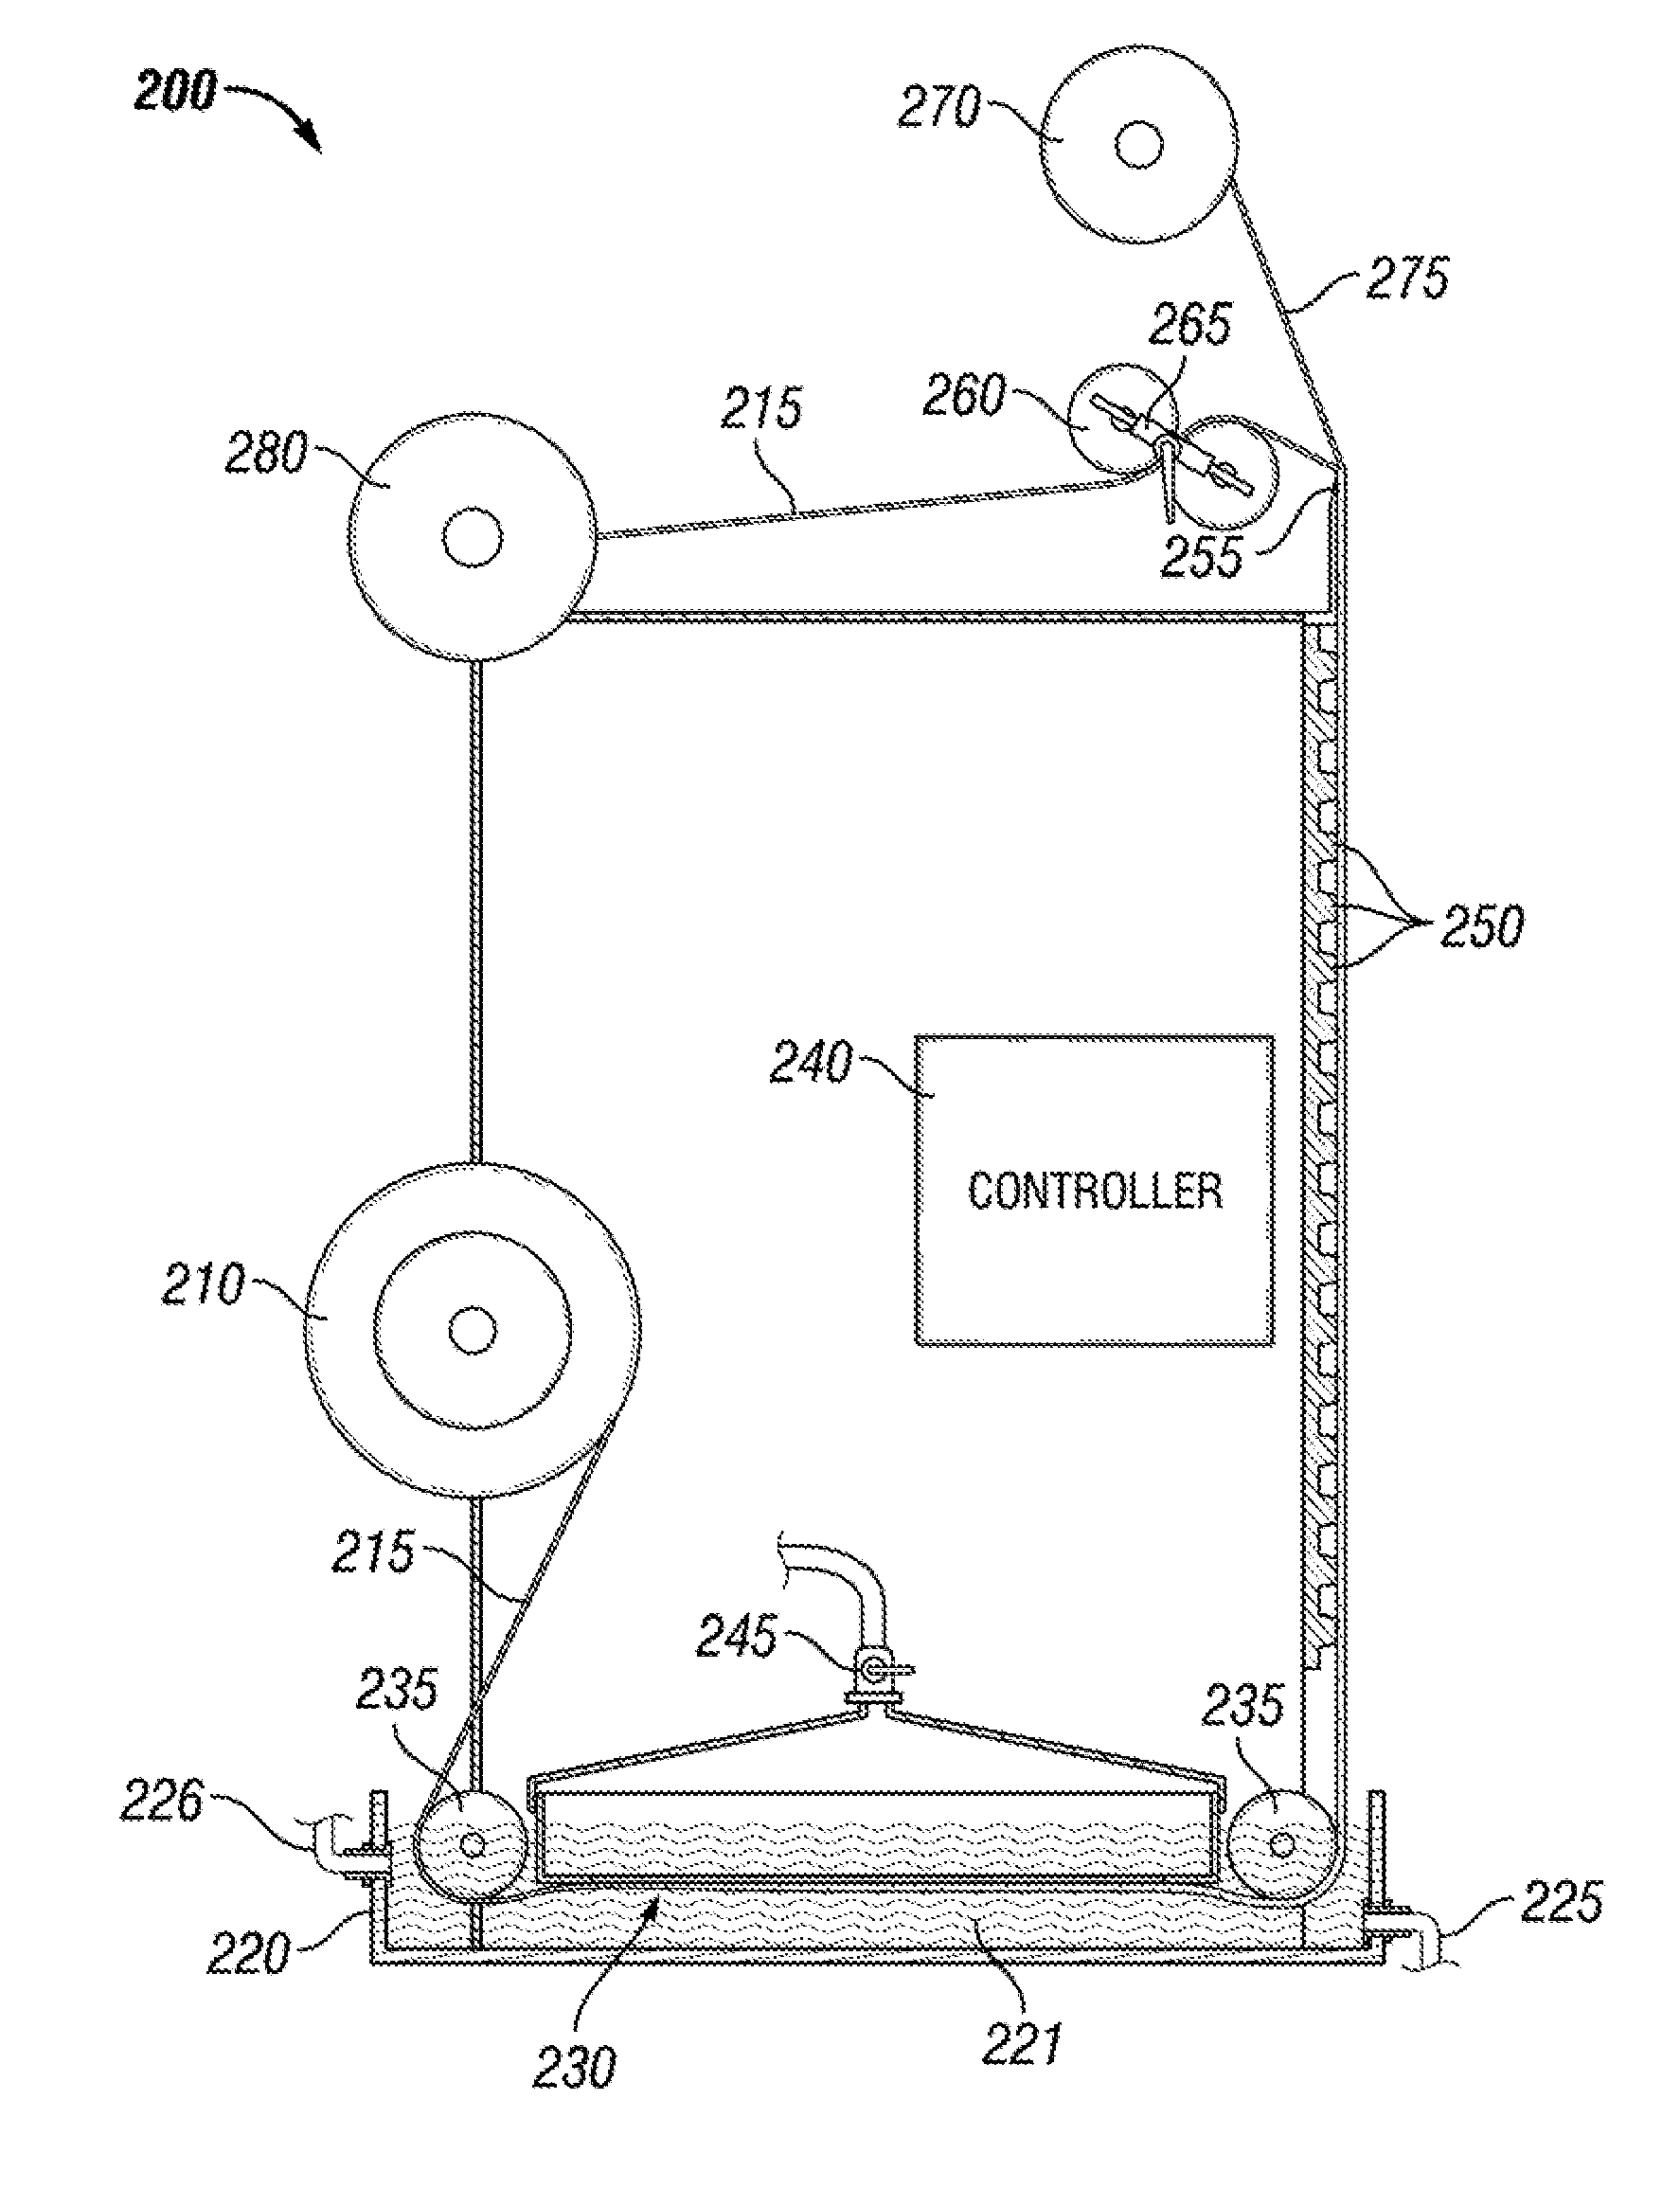 Systems and Methods for Continuous Manufacture of Buckypaper Materials